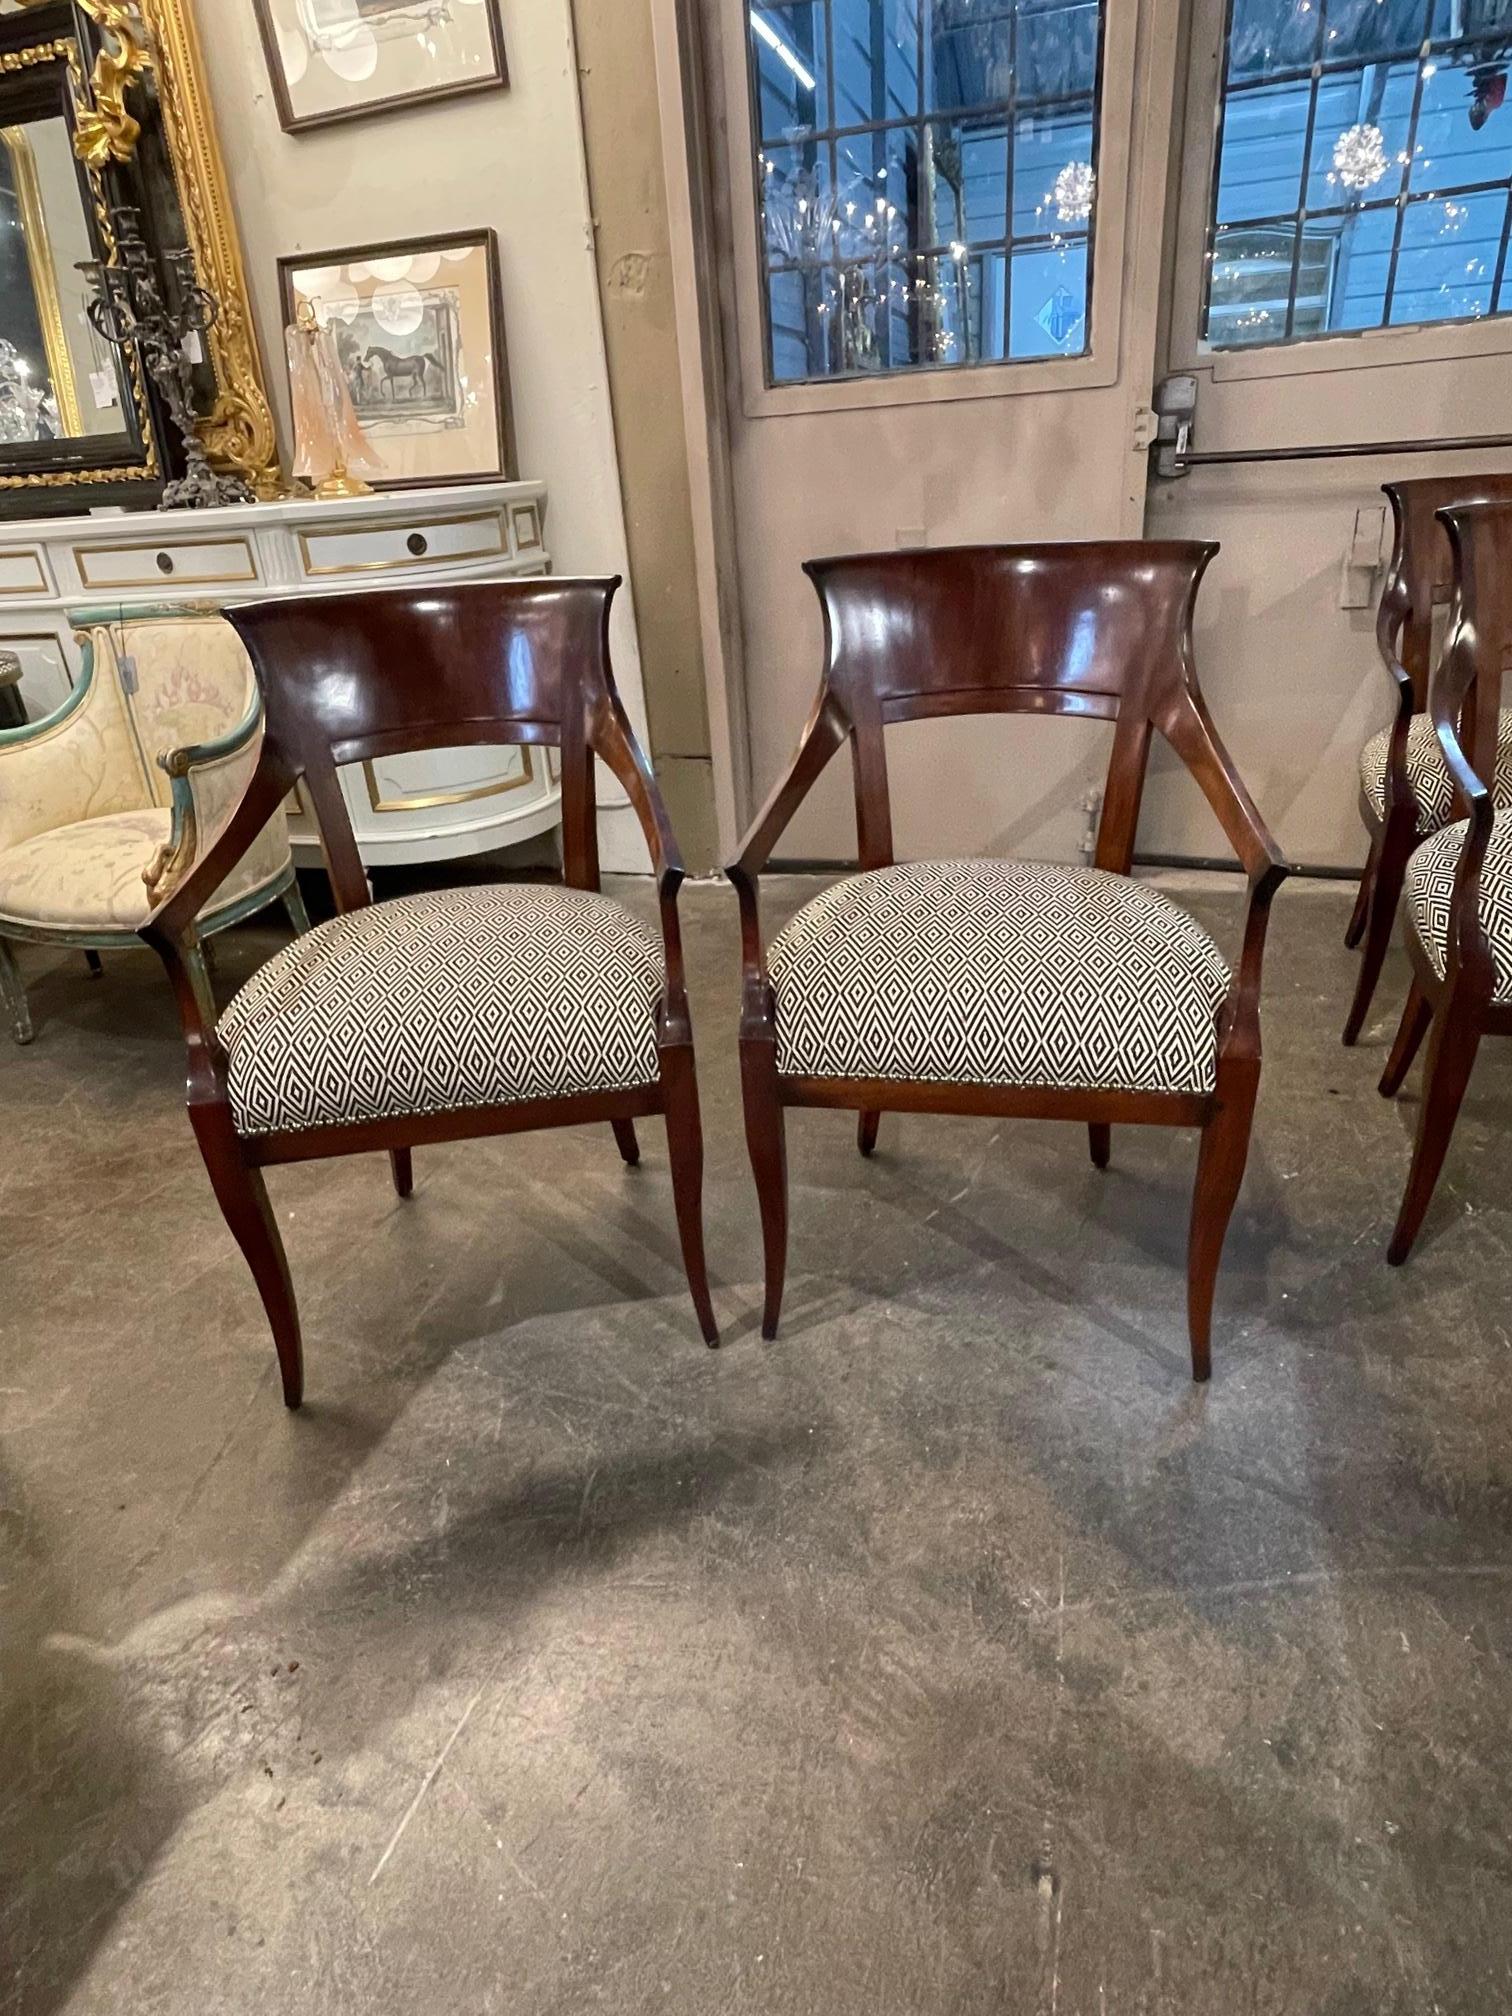 Pair of Austrian Biedermeier arm chairs Circa 1860. Beautiful hobnail detailing on the seat cushion. Gorgeous flame mahogany wood and finish. 2 pair available.